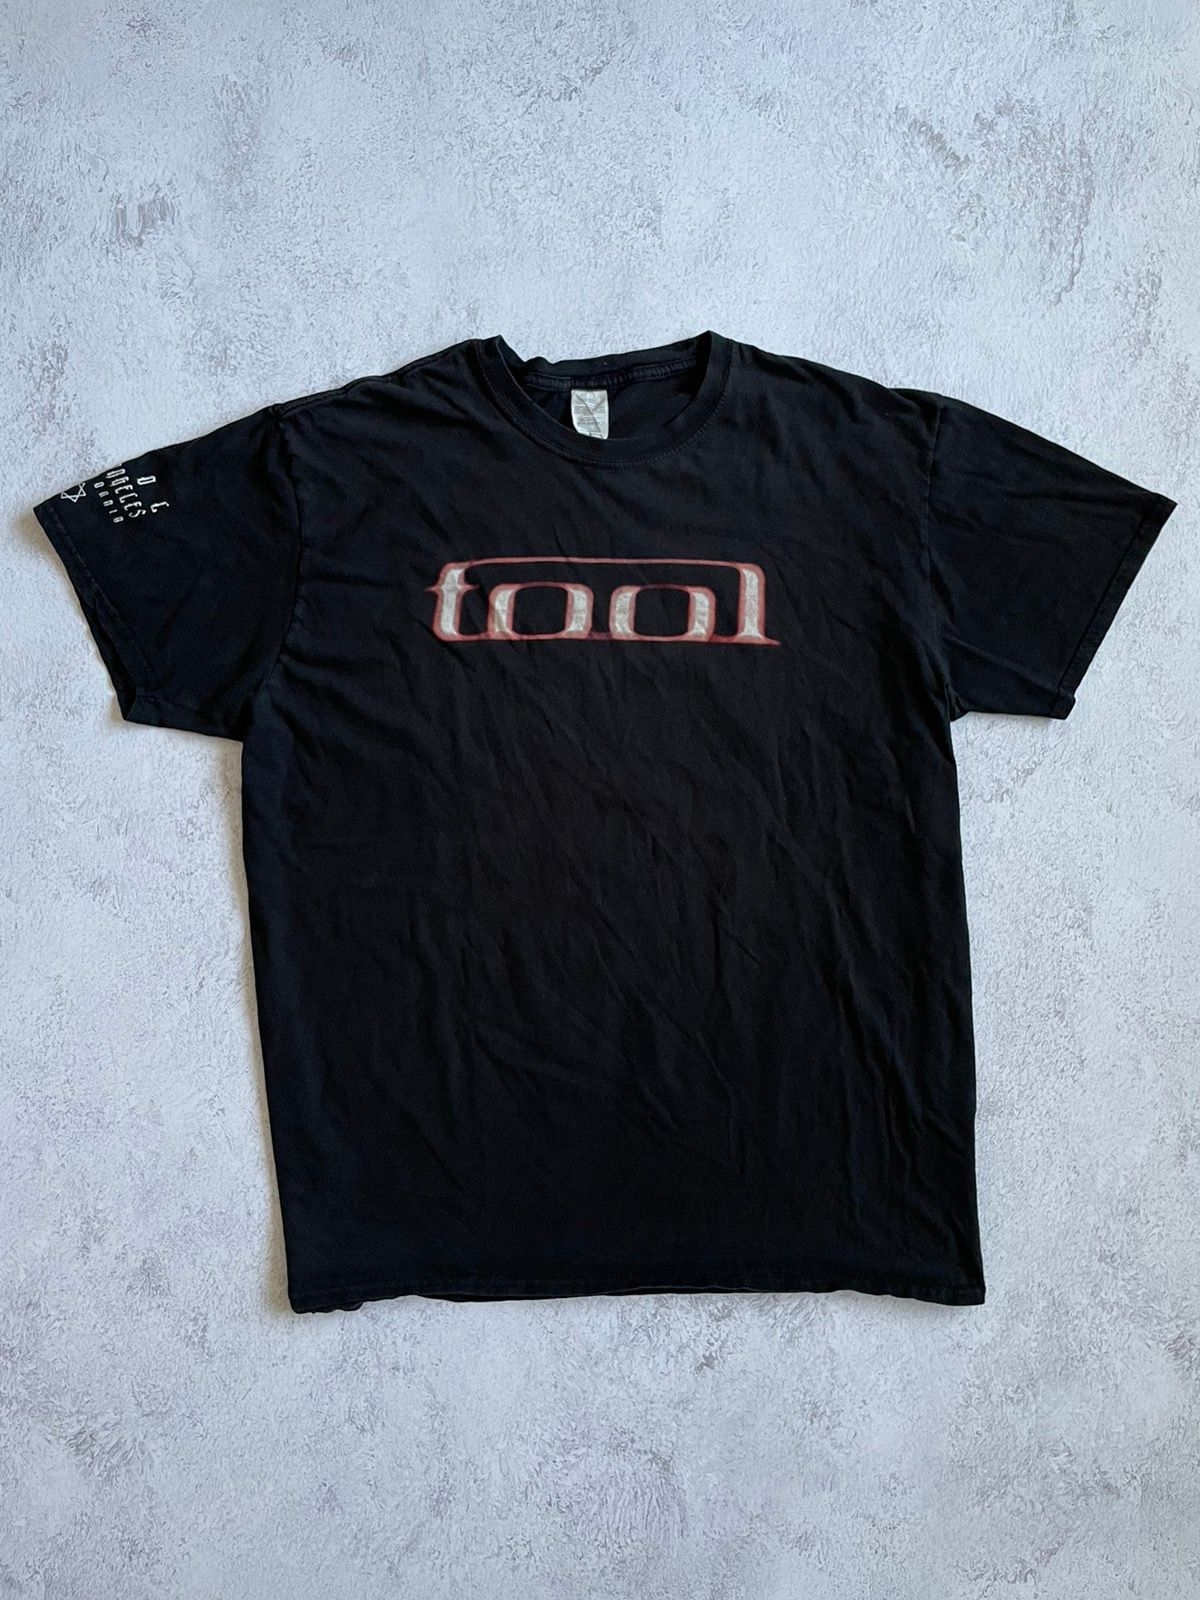 Pre-owned Vintage Tool Band Los Angeles Tour Rock Metal T-shirt Xl In Black